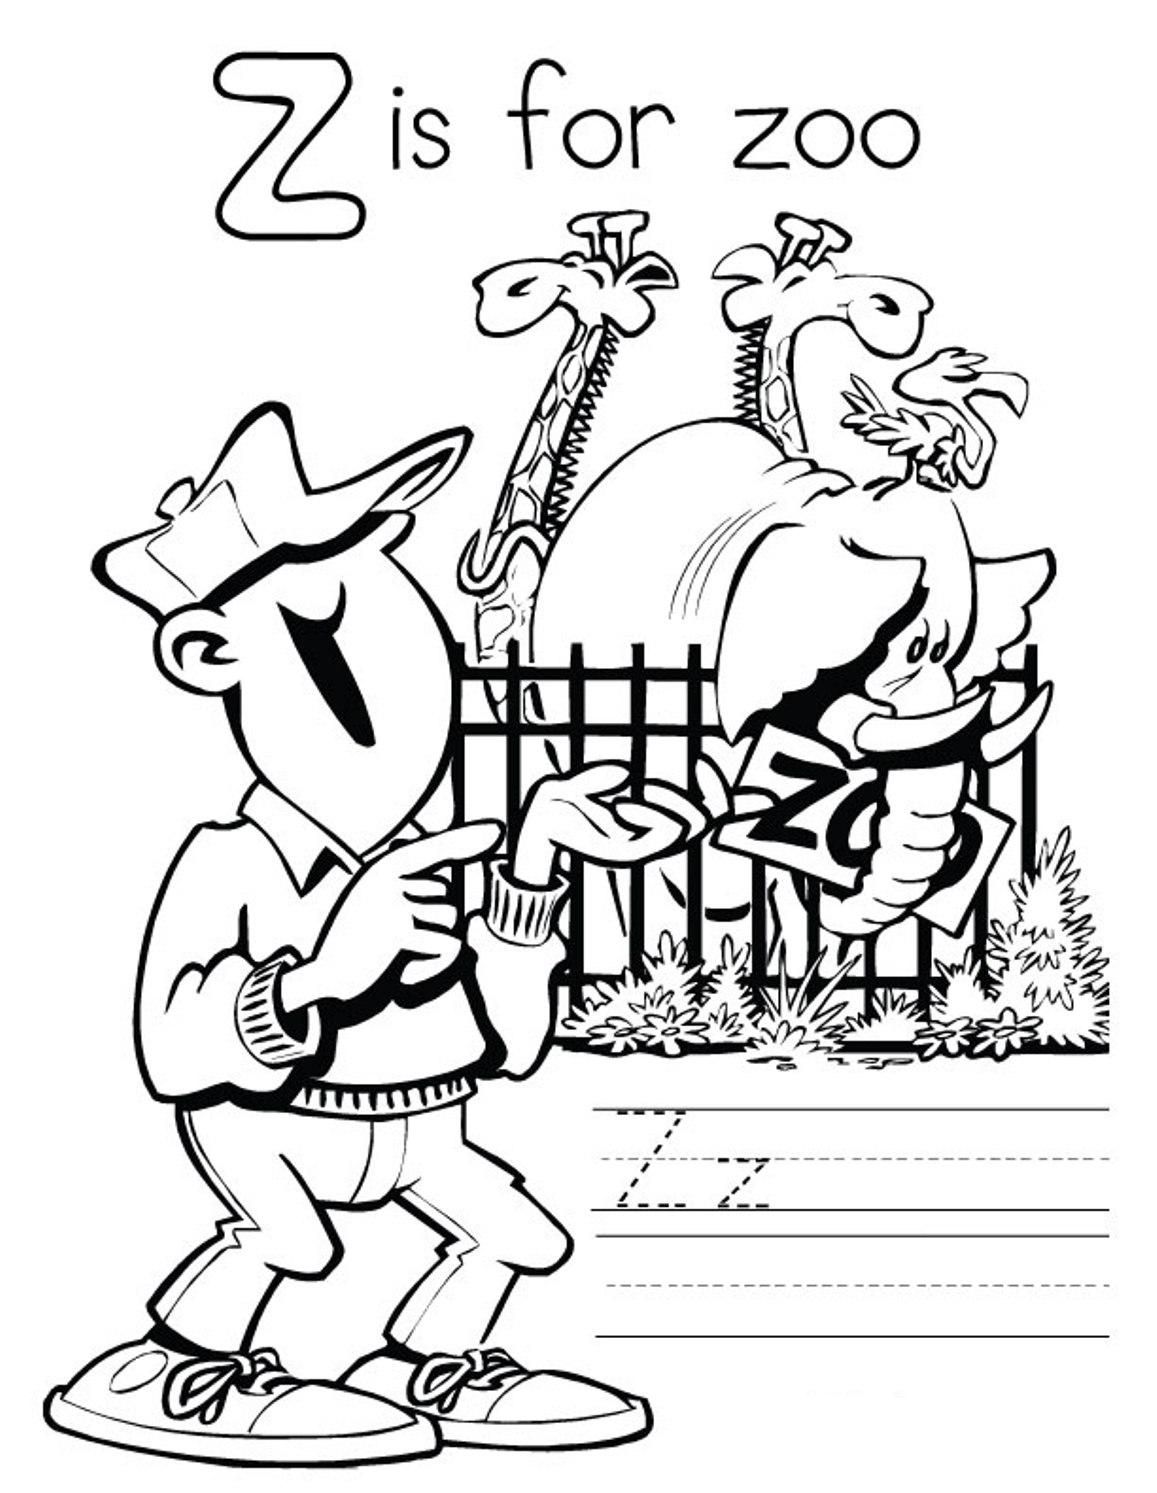 26 Printable Coloring Pages for Kids for: Zoo Coloring. leproject.co